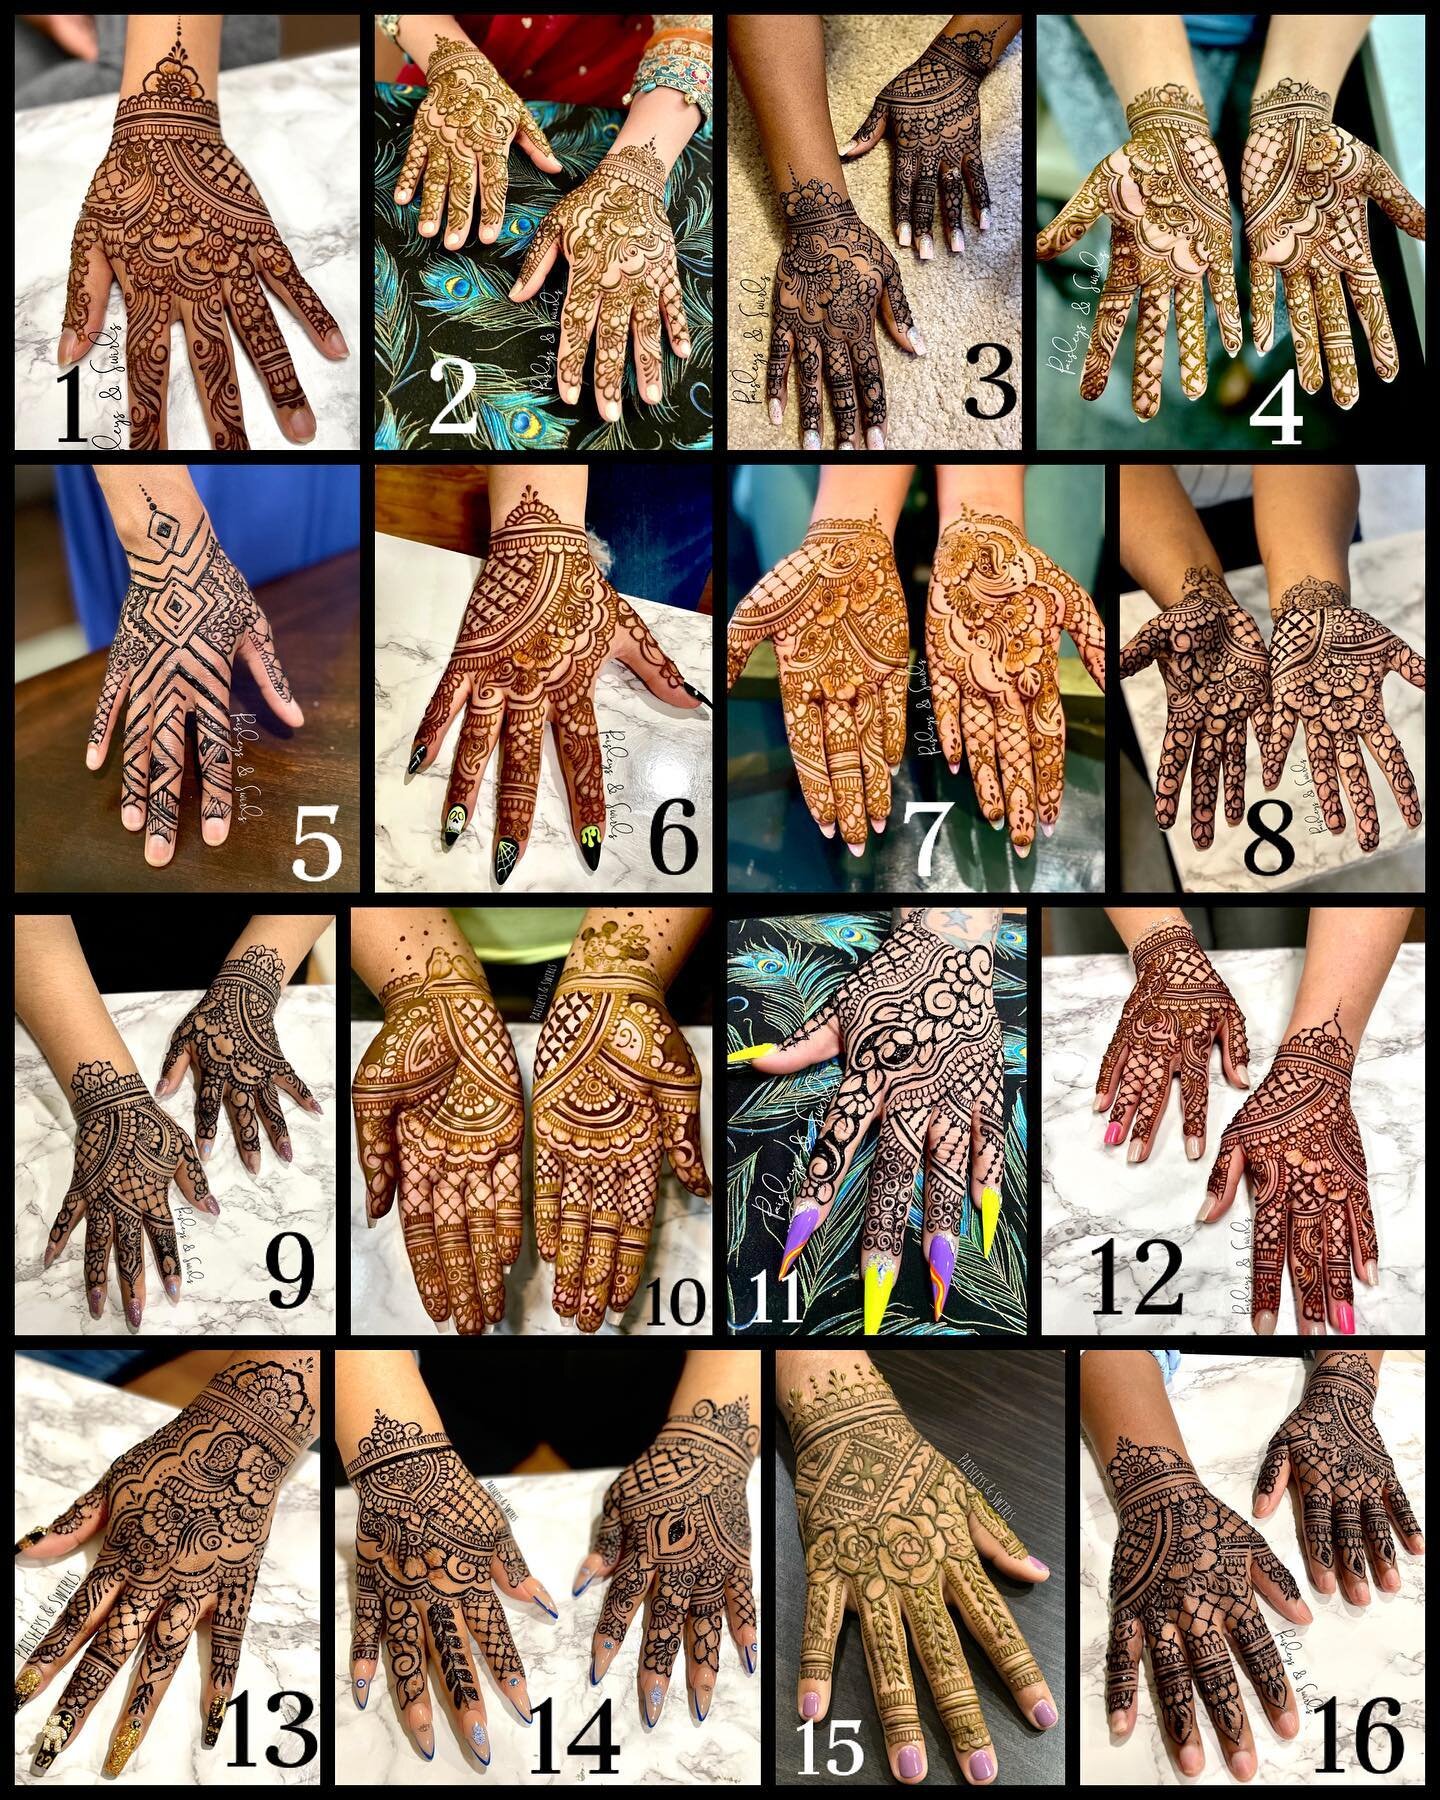 FULL HAND designs! These are growing in popularity and I&rsquo;ve had many requests in the past for Eid so I made a little collection. There is an Eid special on the &lsquo;basic hand strip&rsquo; and &lsquo;full hand&rsquo; designs on my scheduler. 